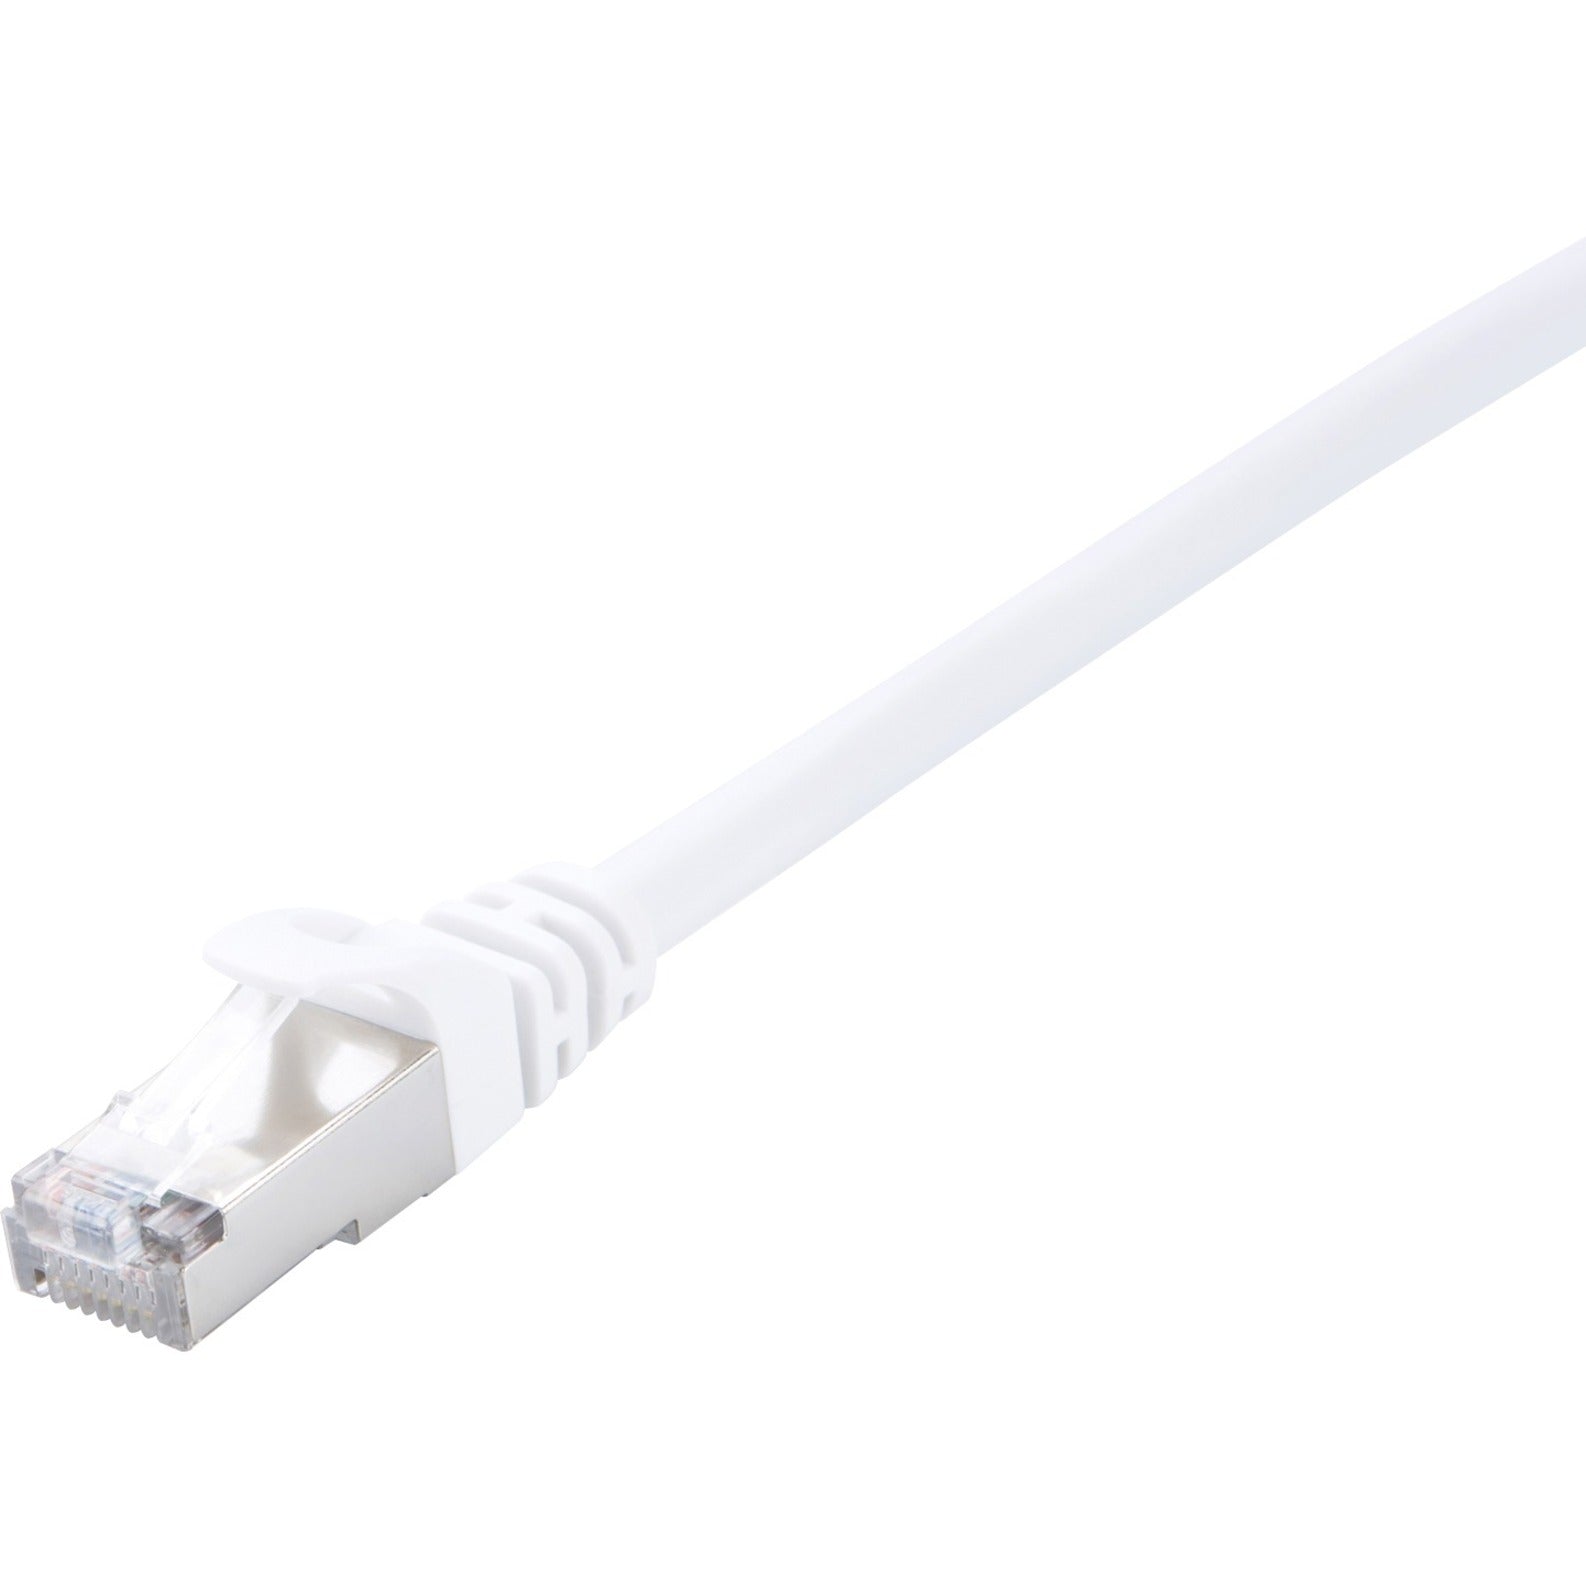 V7 V7CAT5STP-02M-WHT-1N White Cat5e Shielded (STP) Cable RJ45 Male to RJ45 Male 2m 6.6ft, Molded, Booted, Locking Latch, Strain Relief, Noise Reducing